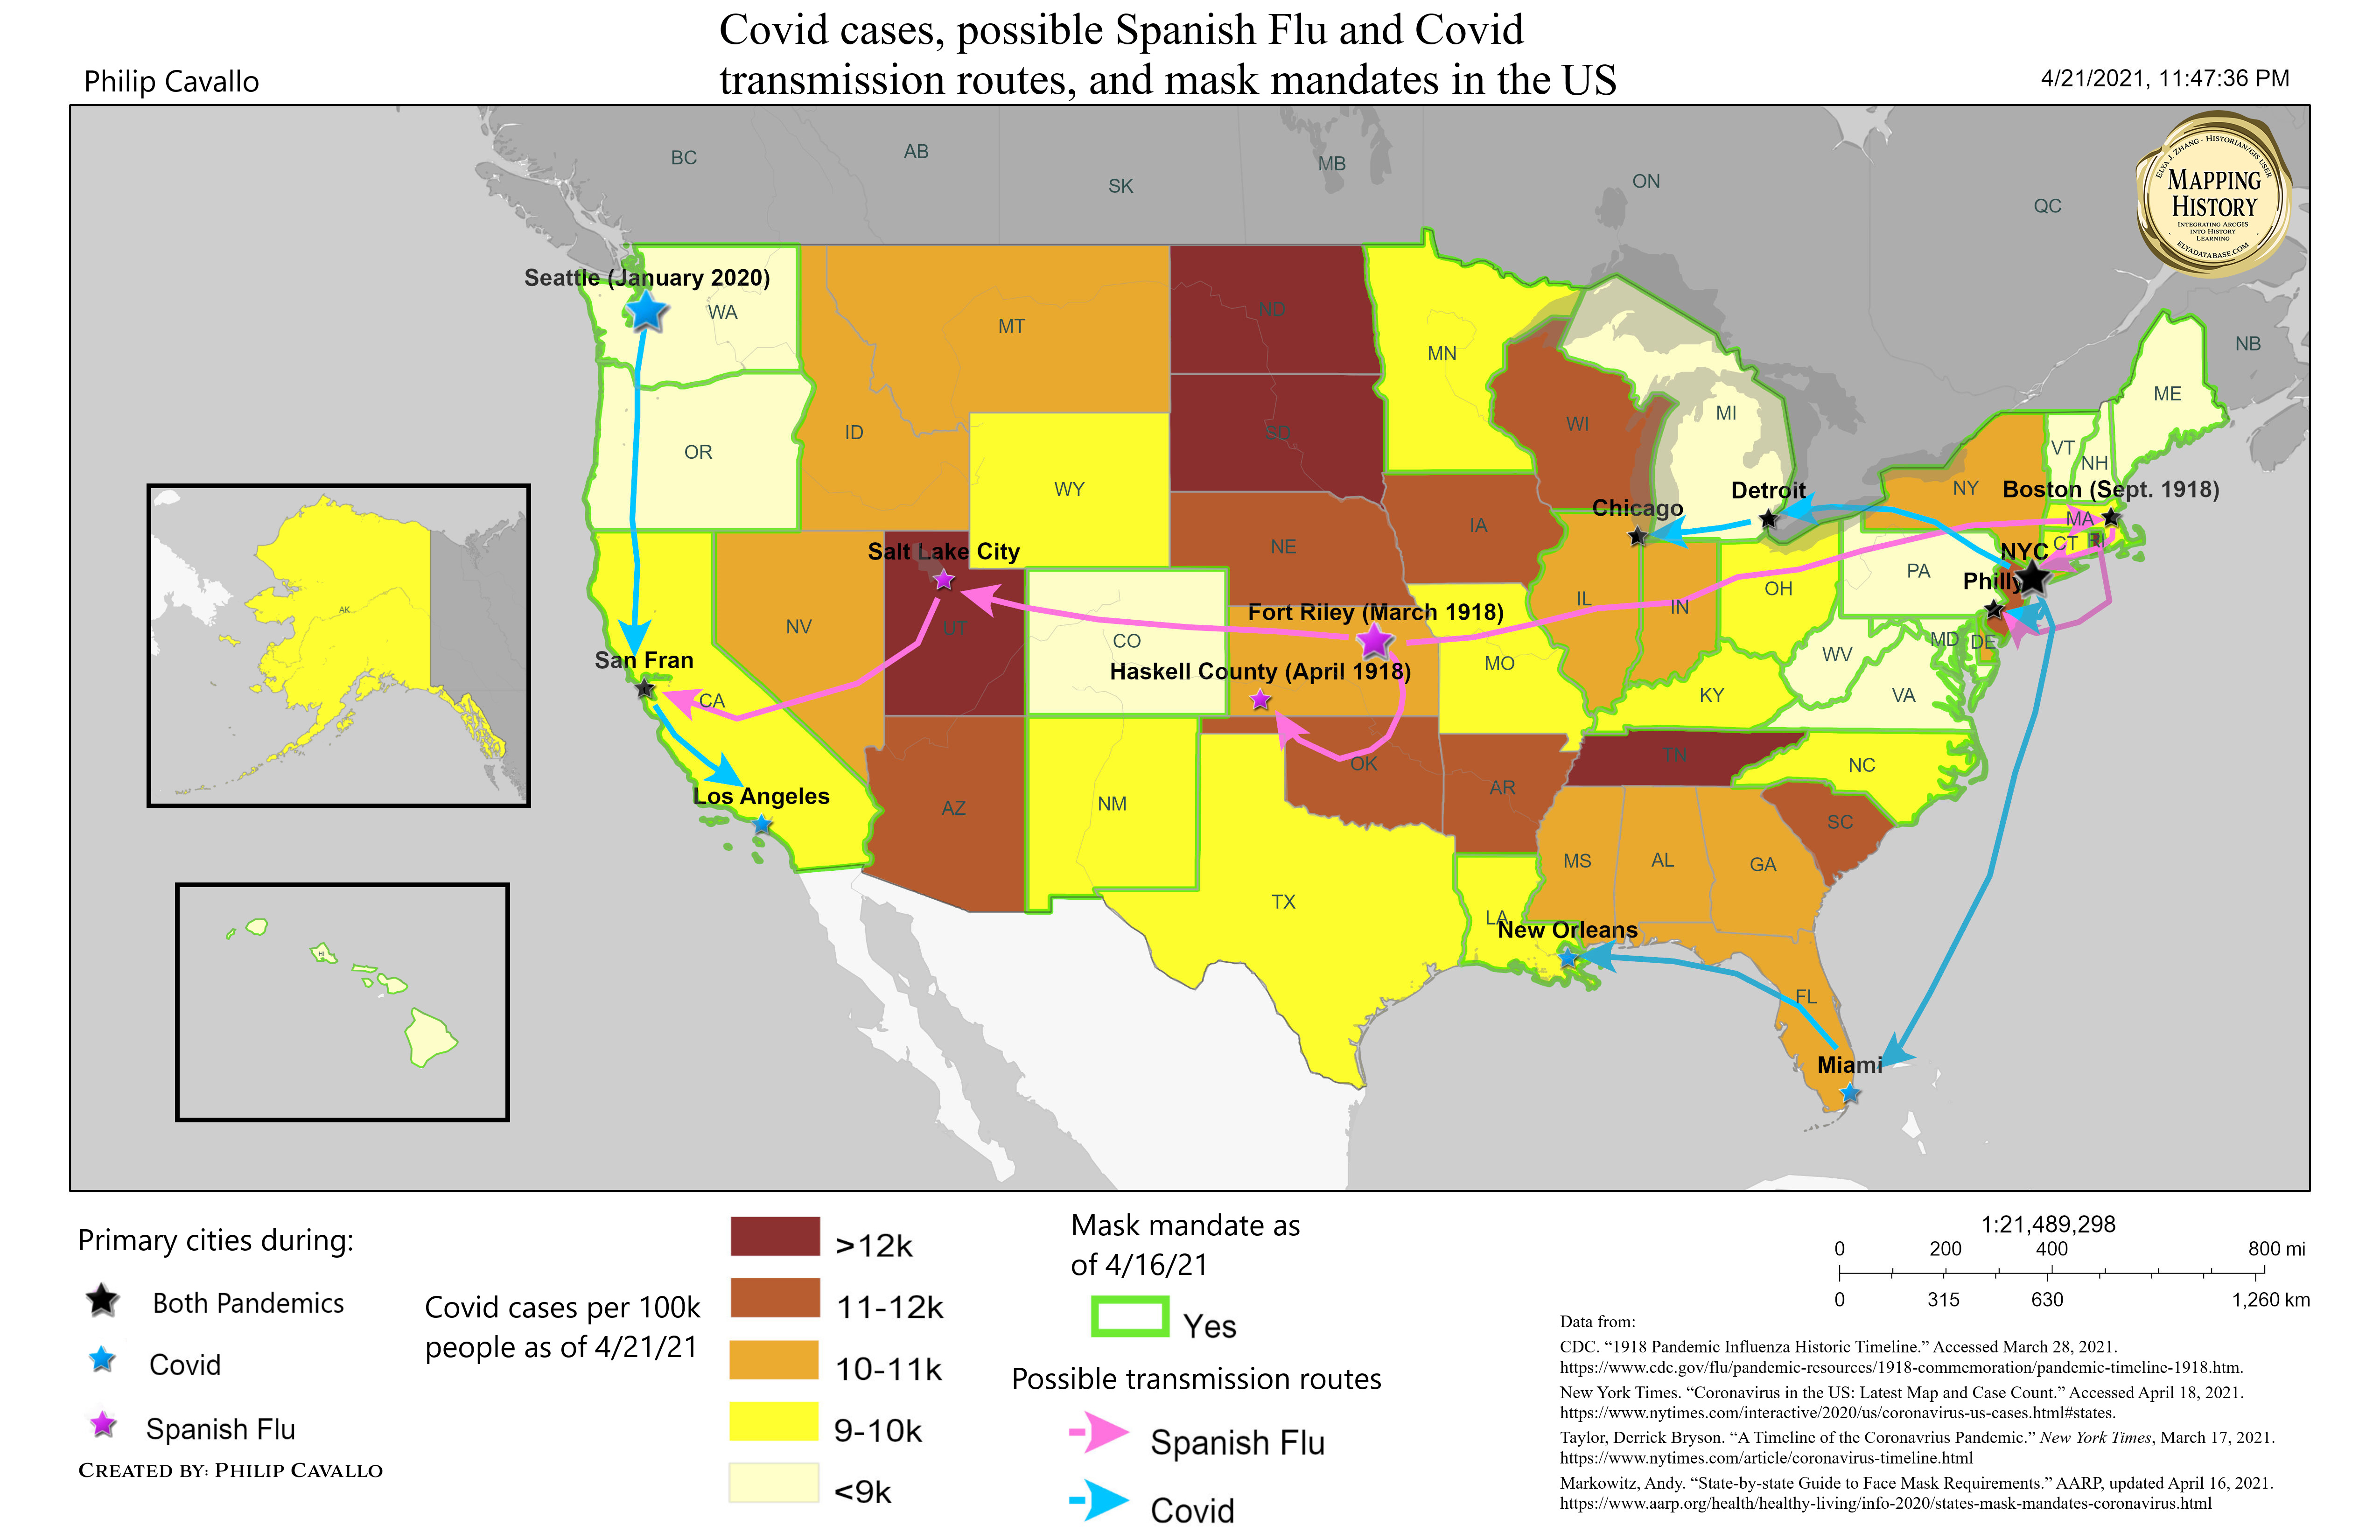 Covid cases, possible Spanish Flu and Covid transmission routes and mask mandates in the US